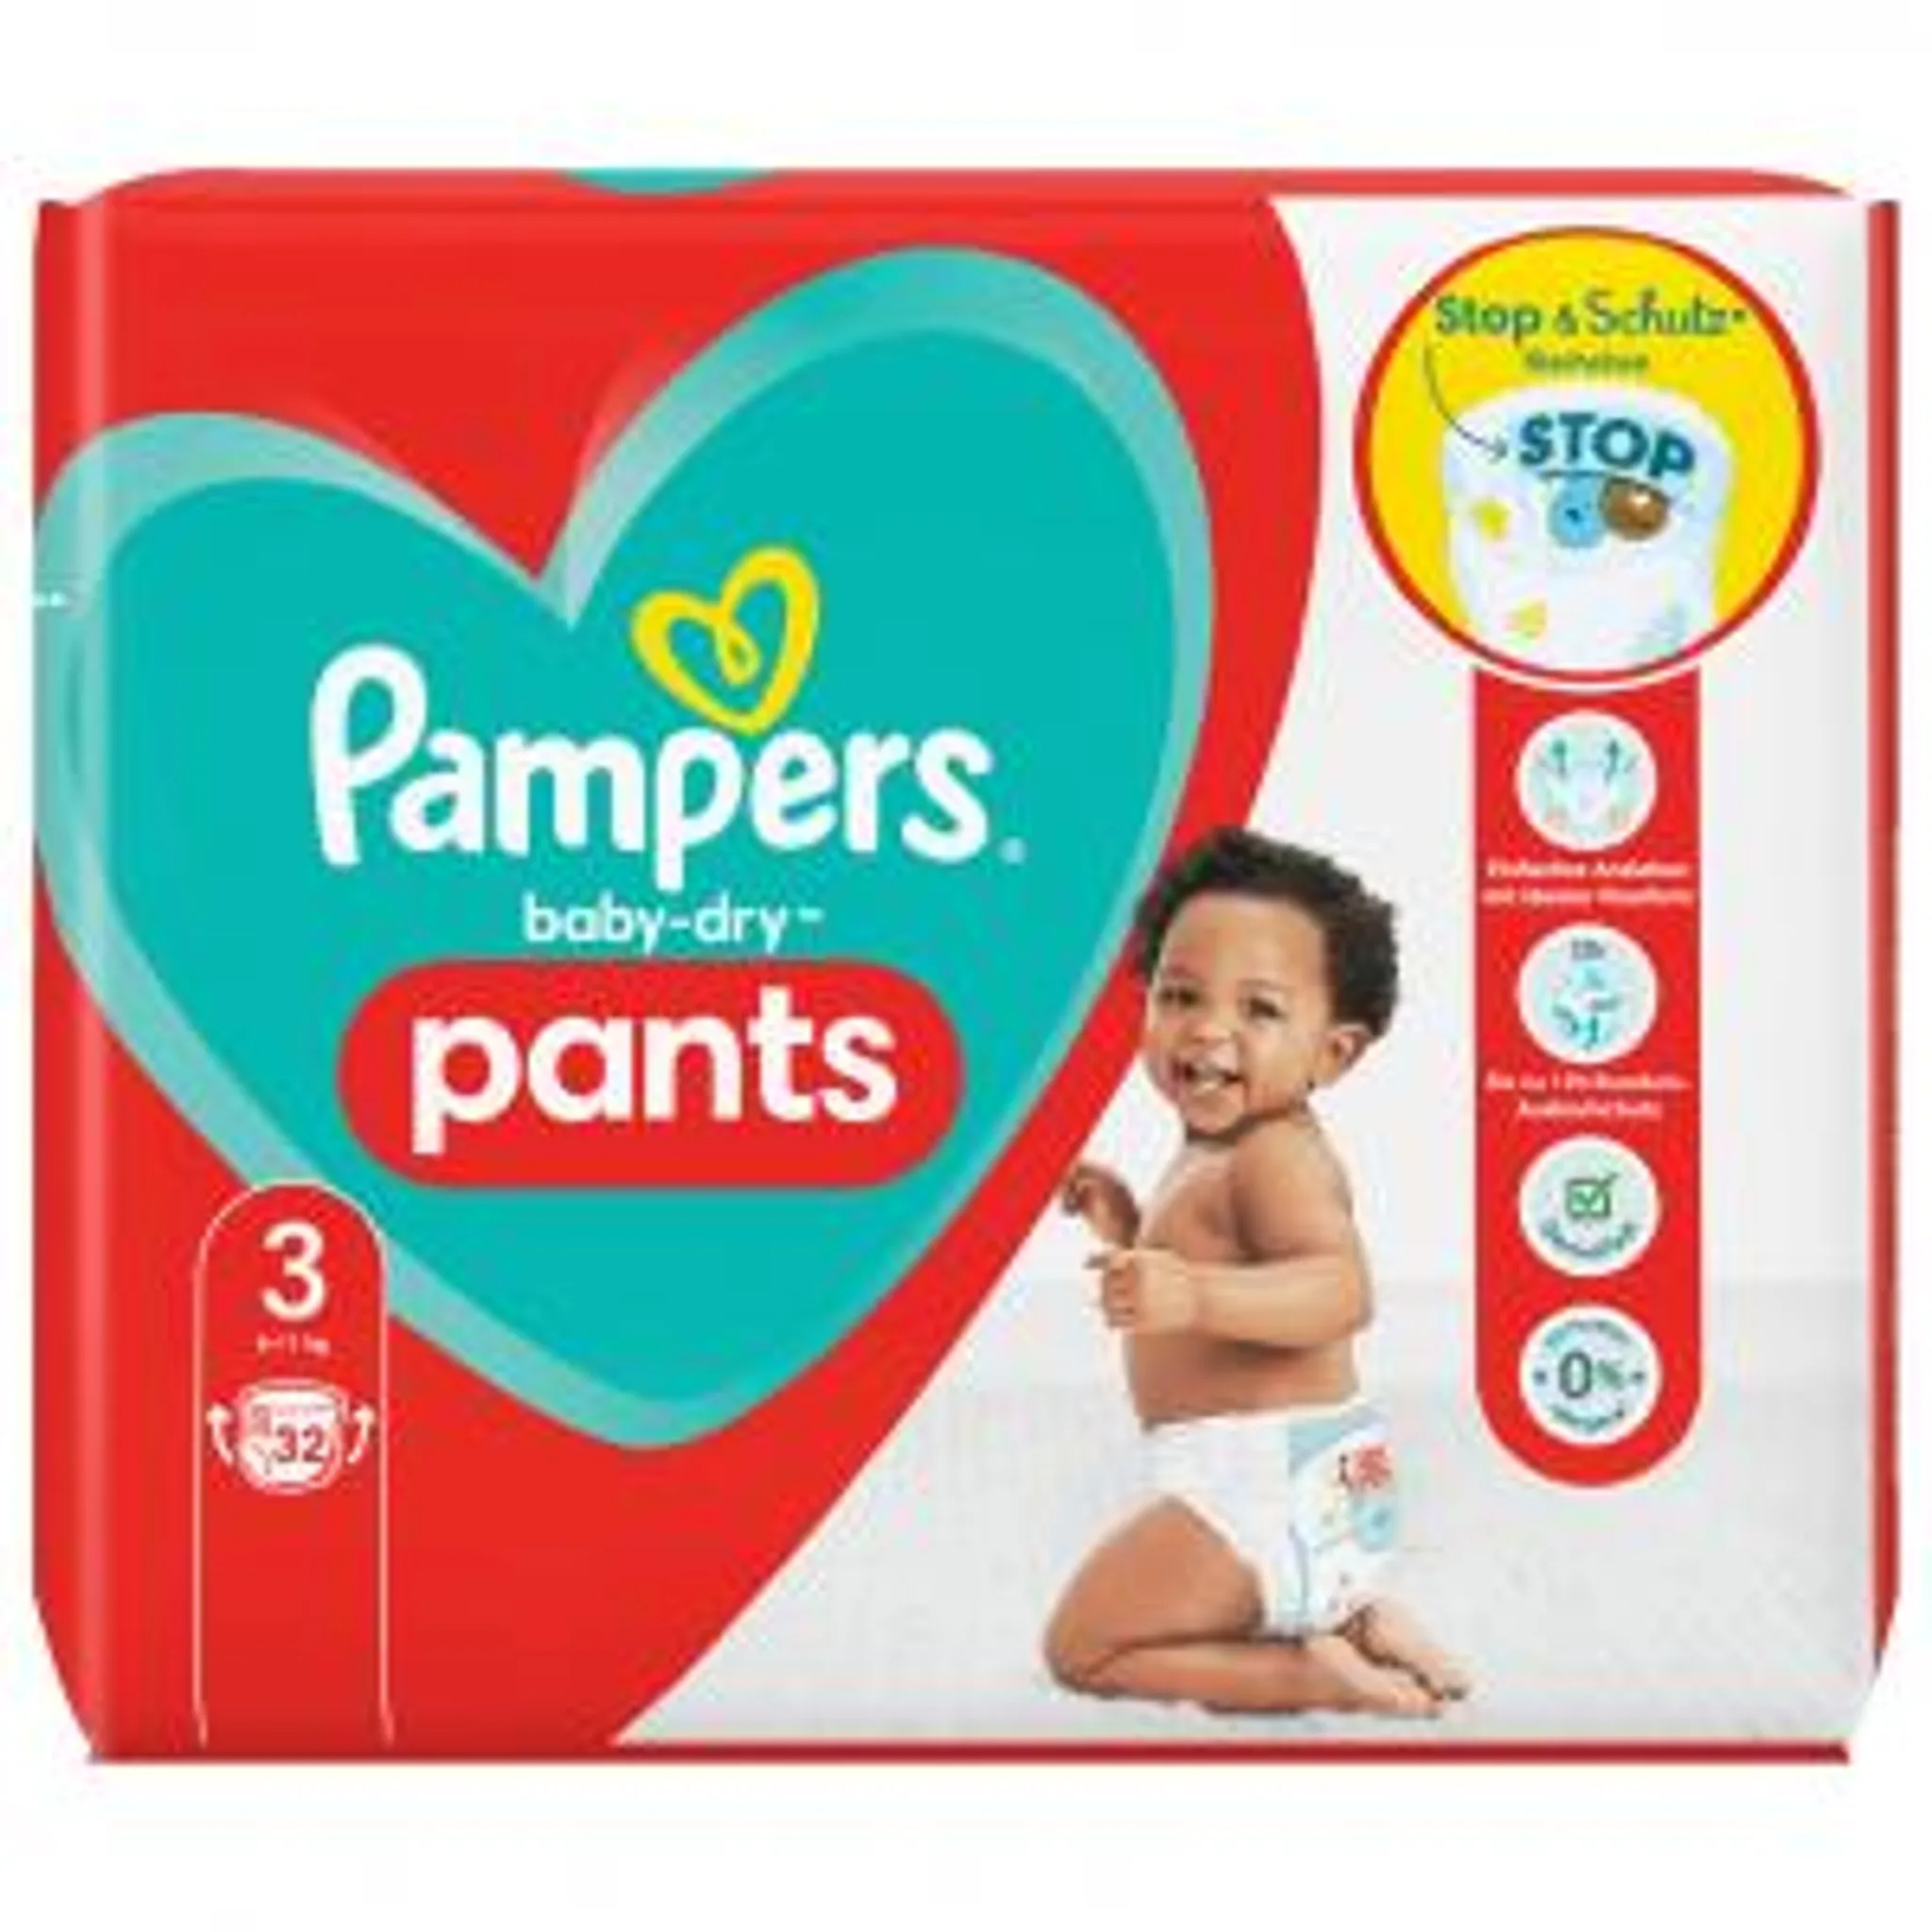 pampers generator imion